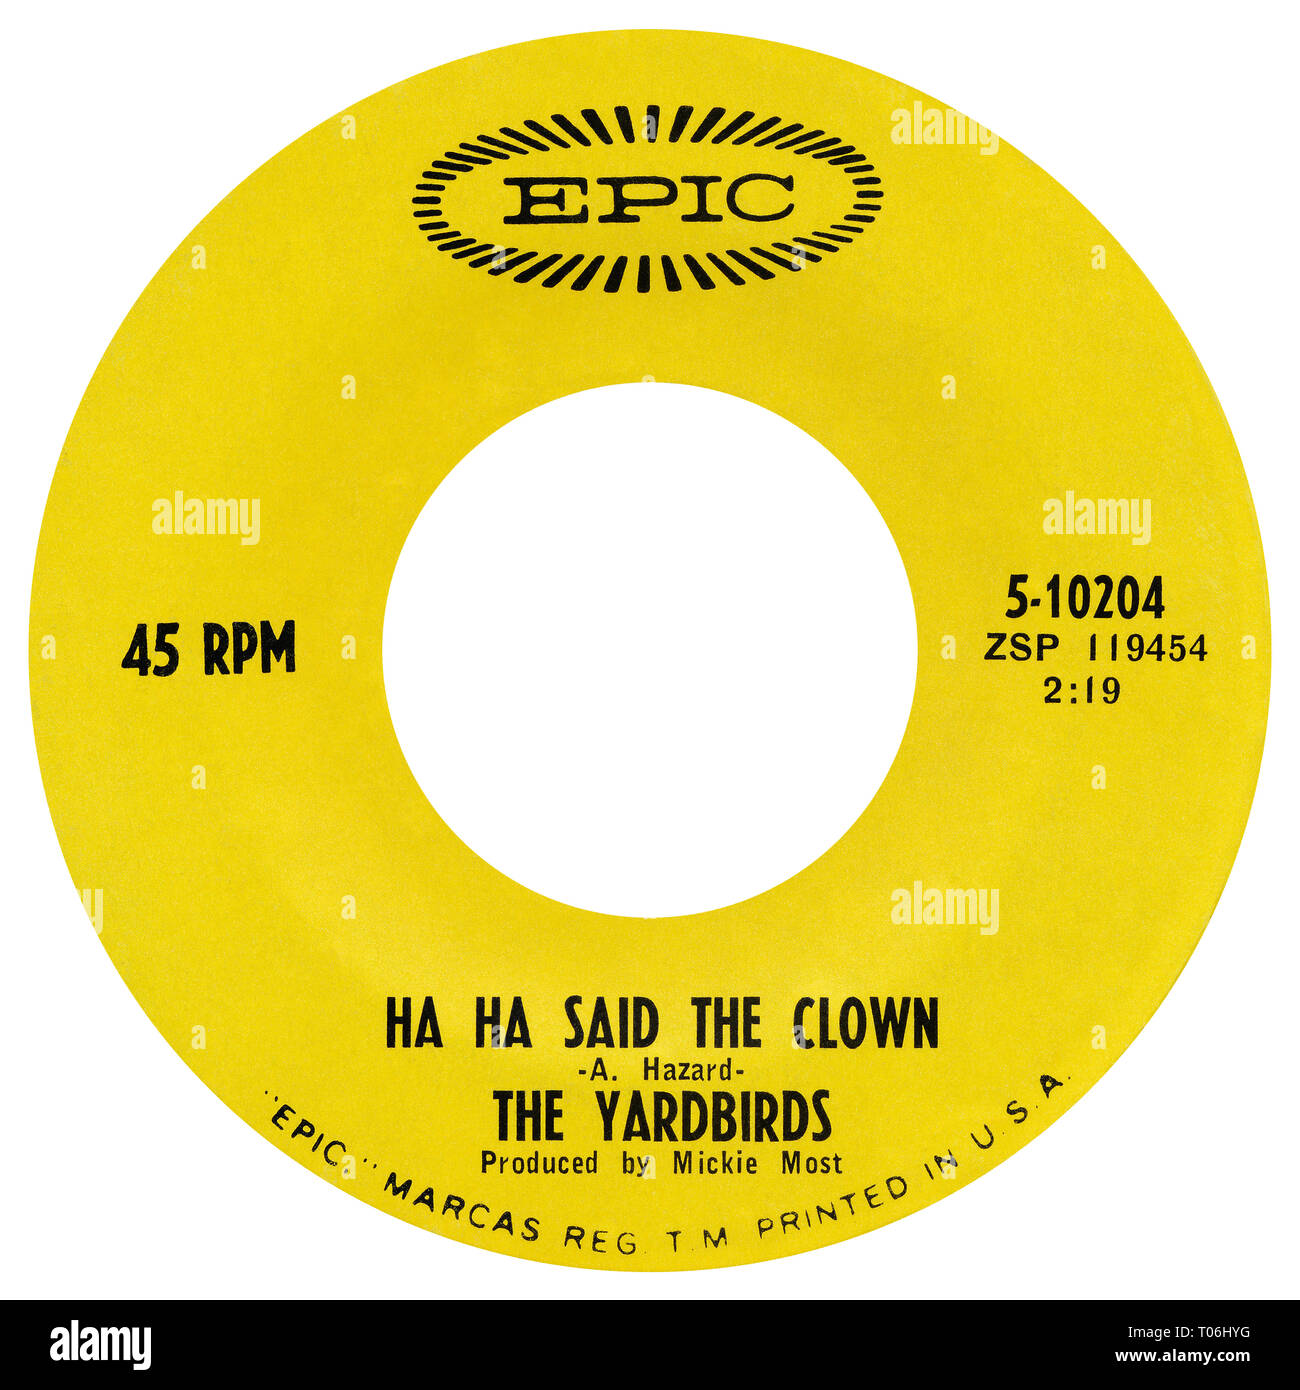 US 45 rpm single of Ha Ha Said The Clown by The Yardbirds on the Epic label from 1967. Written by Tony Hazard and produced by Mickie Most. Stock Photo